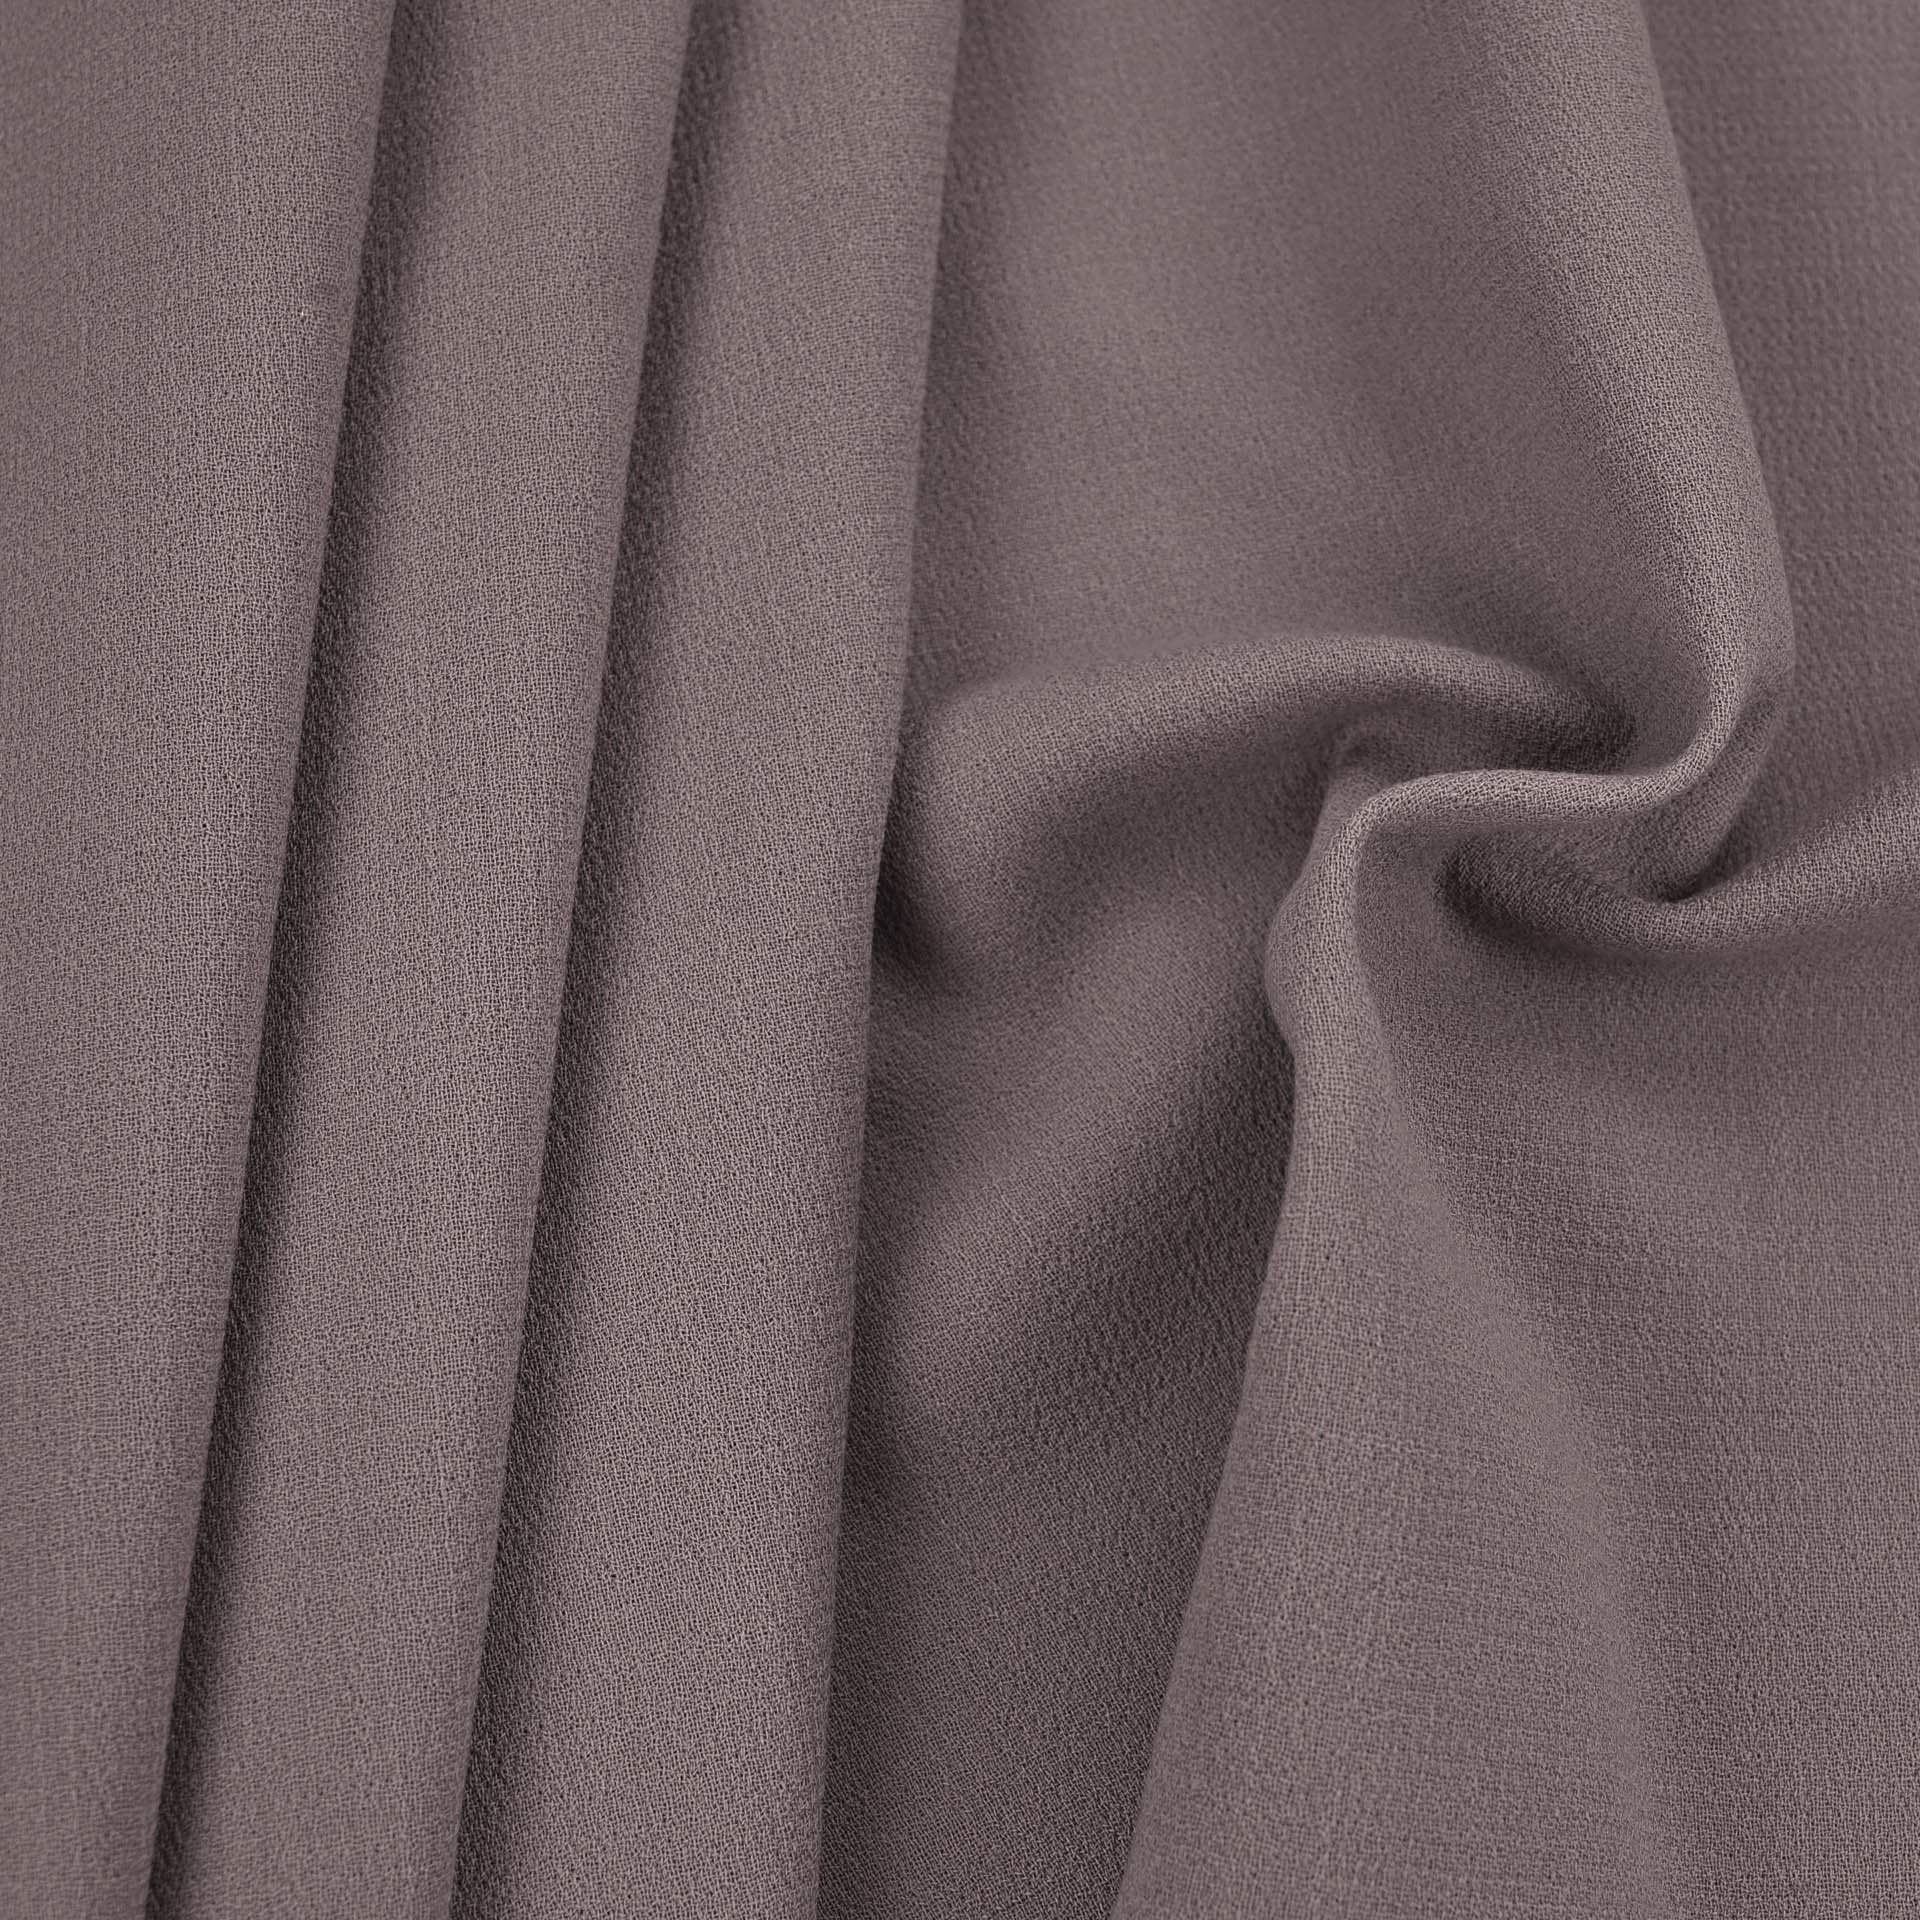 Double-Weave Crepe Fabric 96867